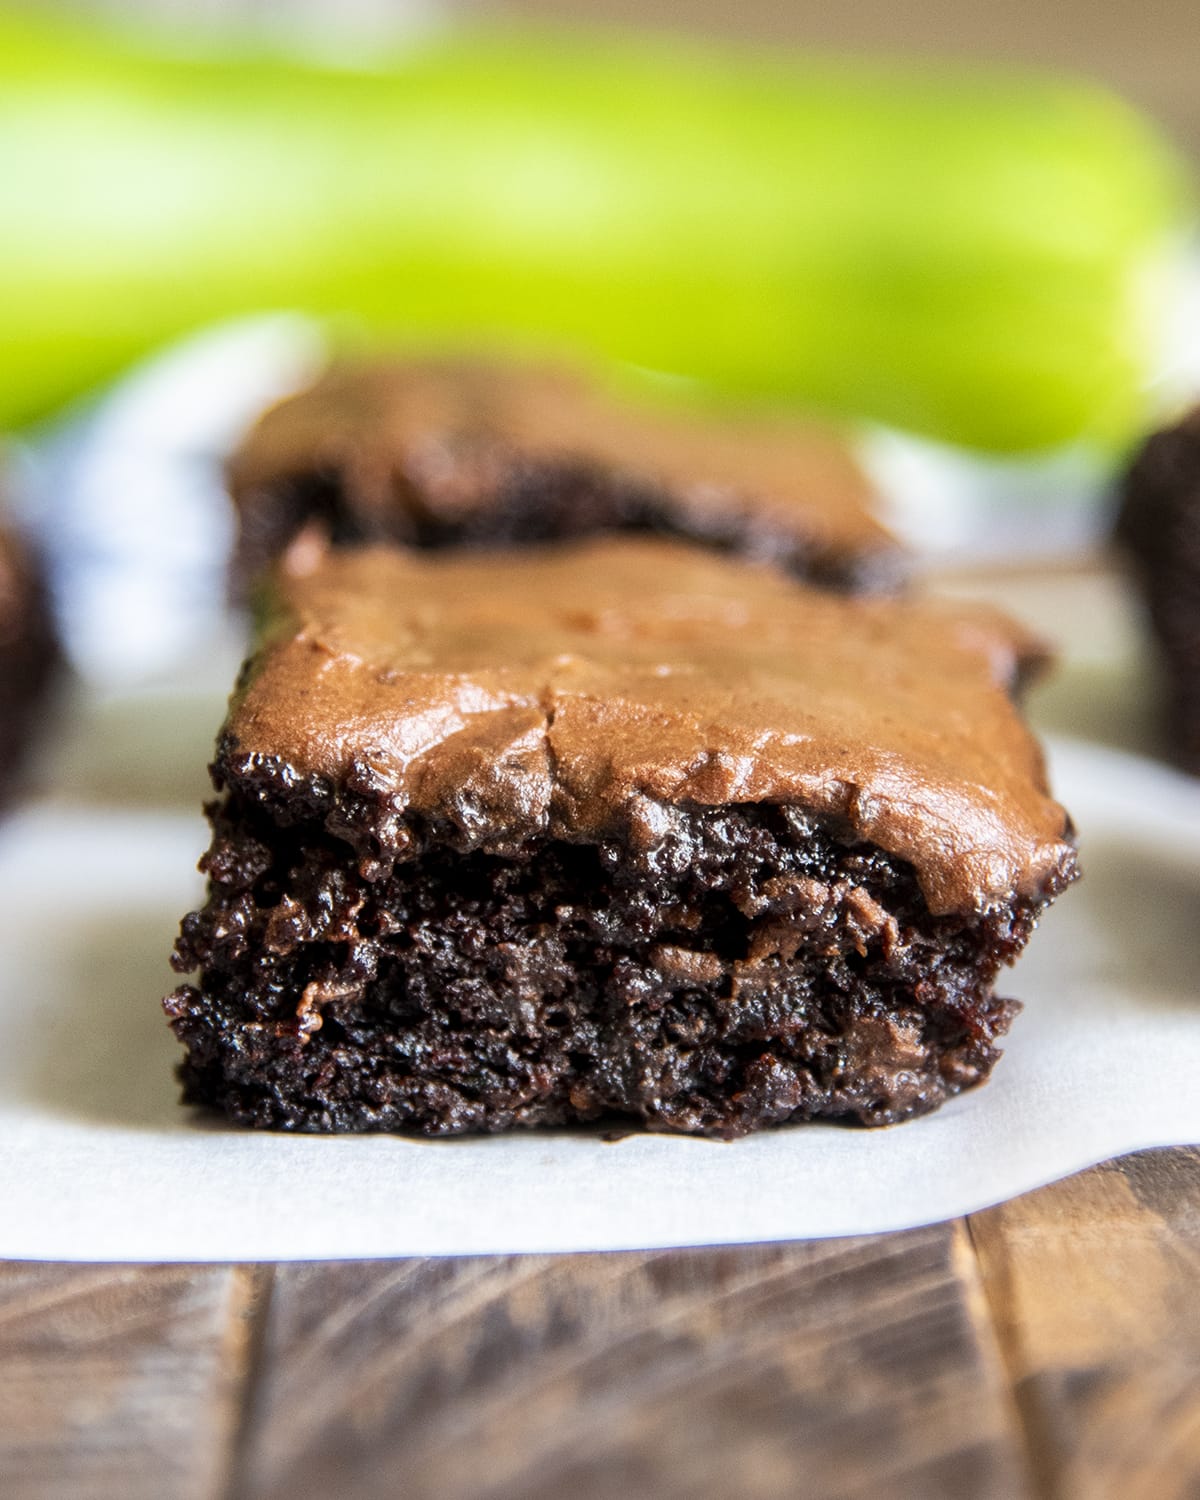 A chocolate zucchini brownie topped with chocolate icing.